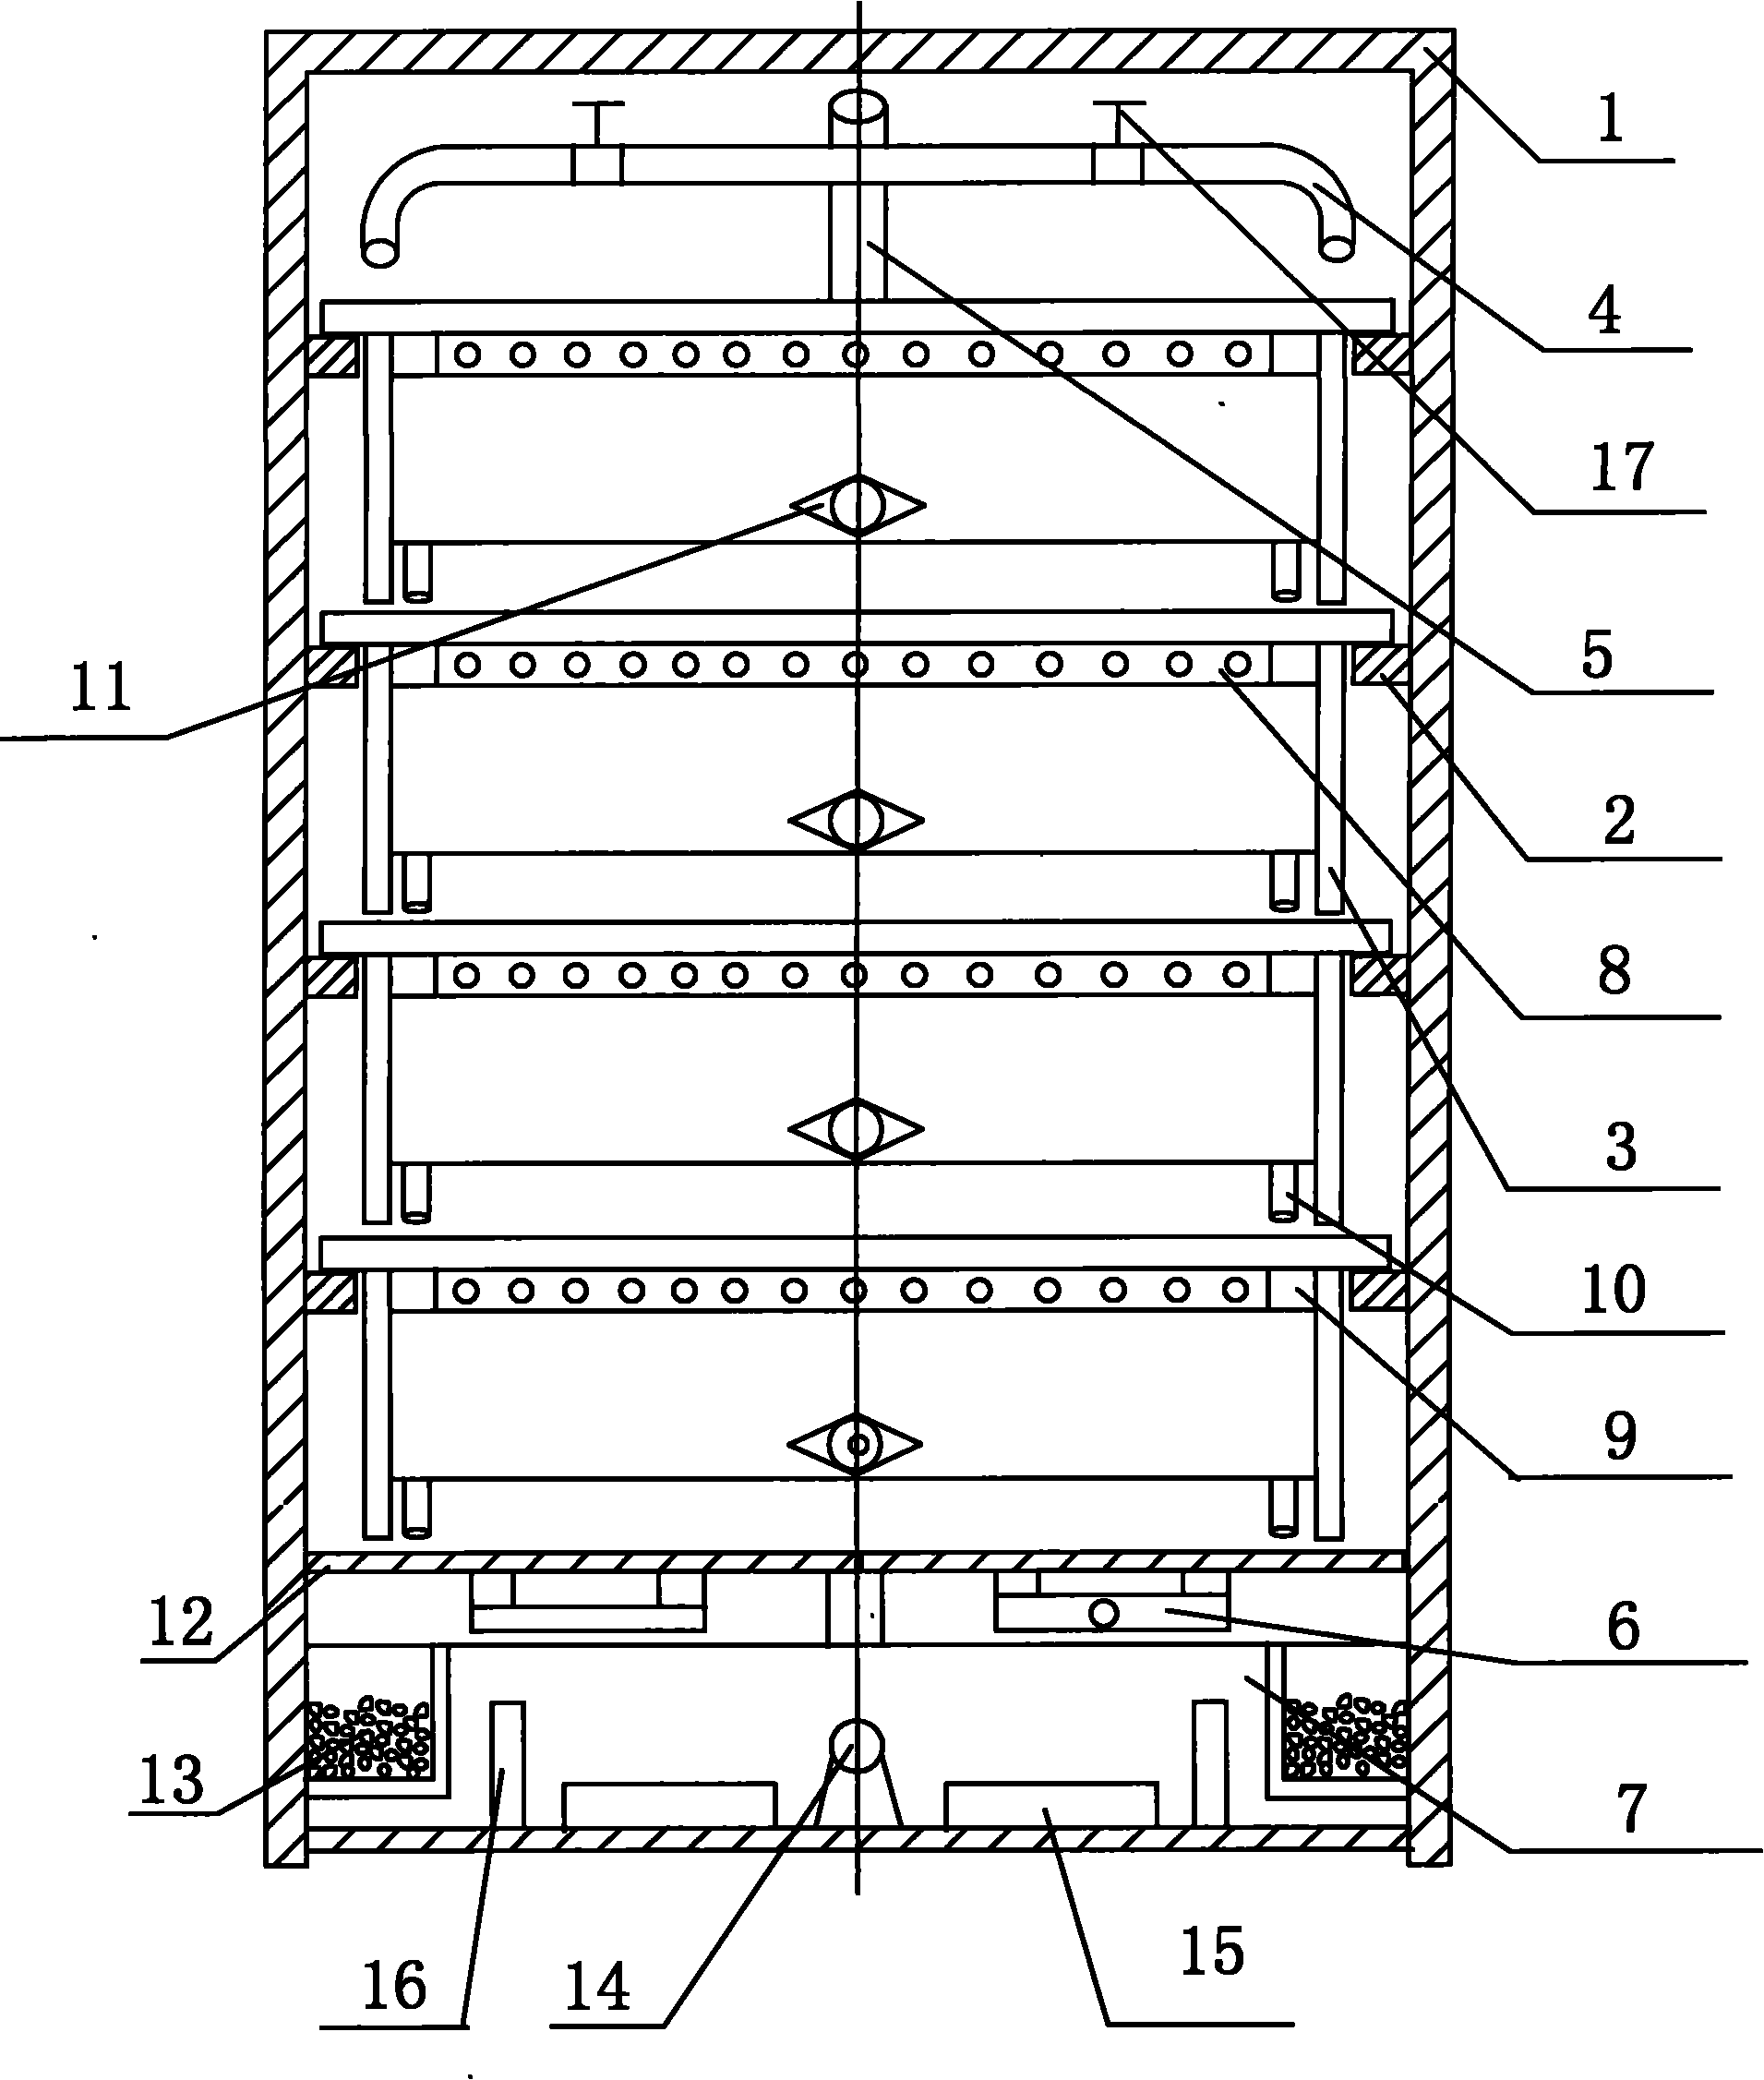 Breeding and hatching device for salmon and trout